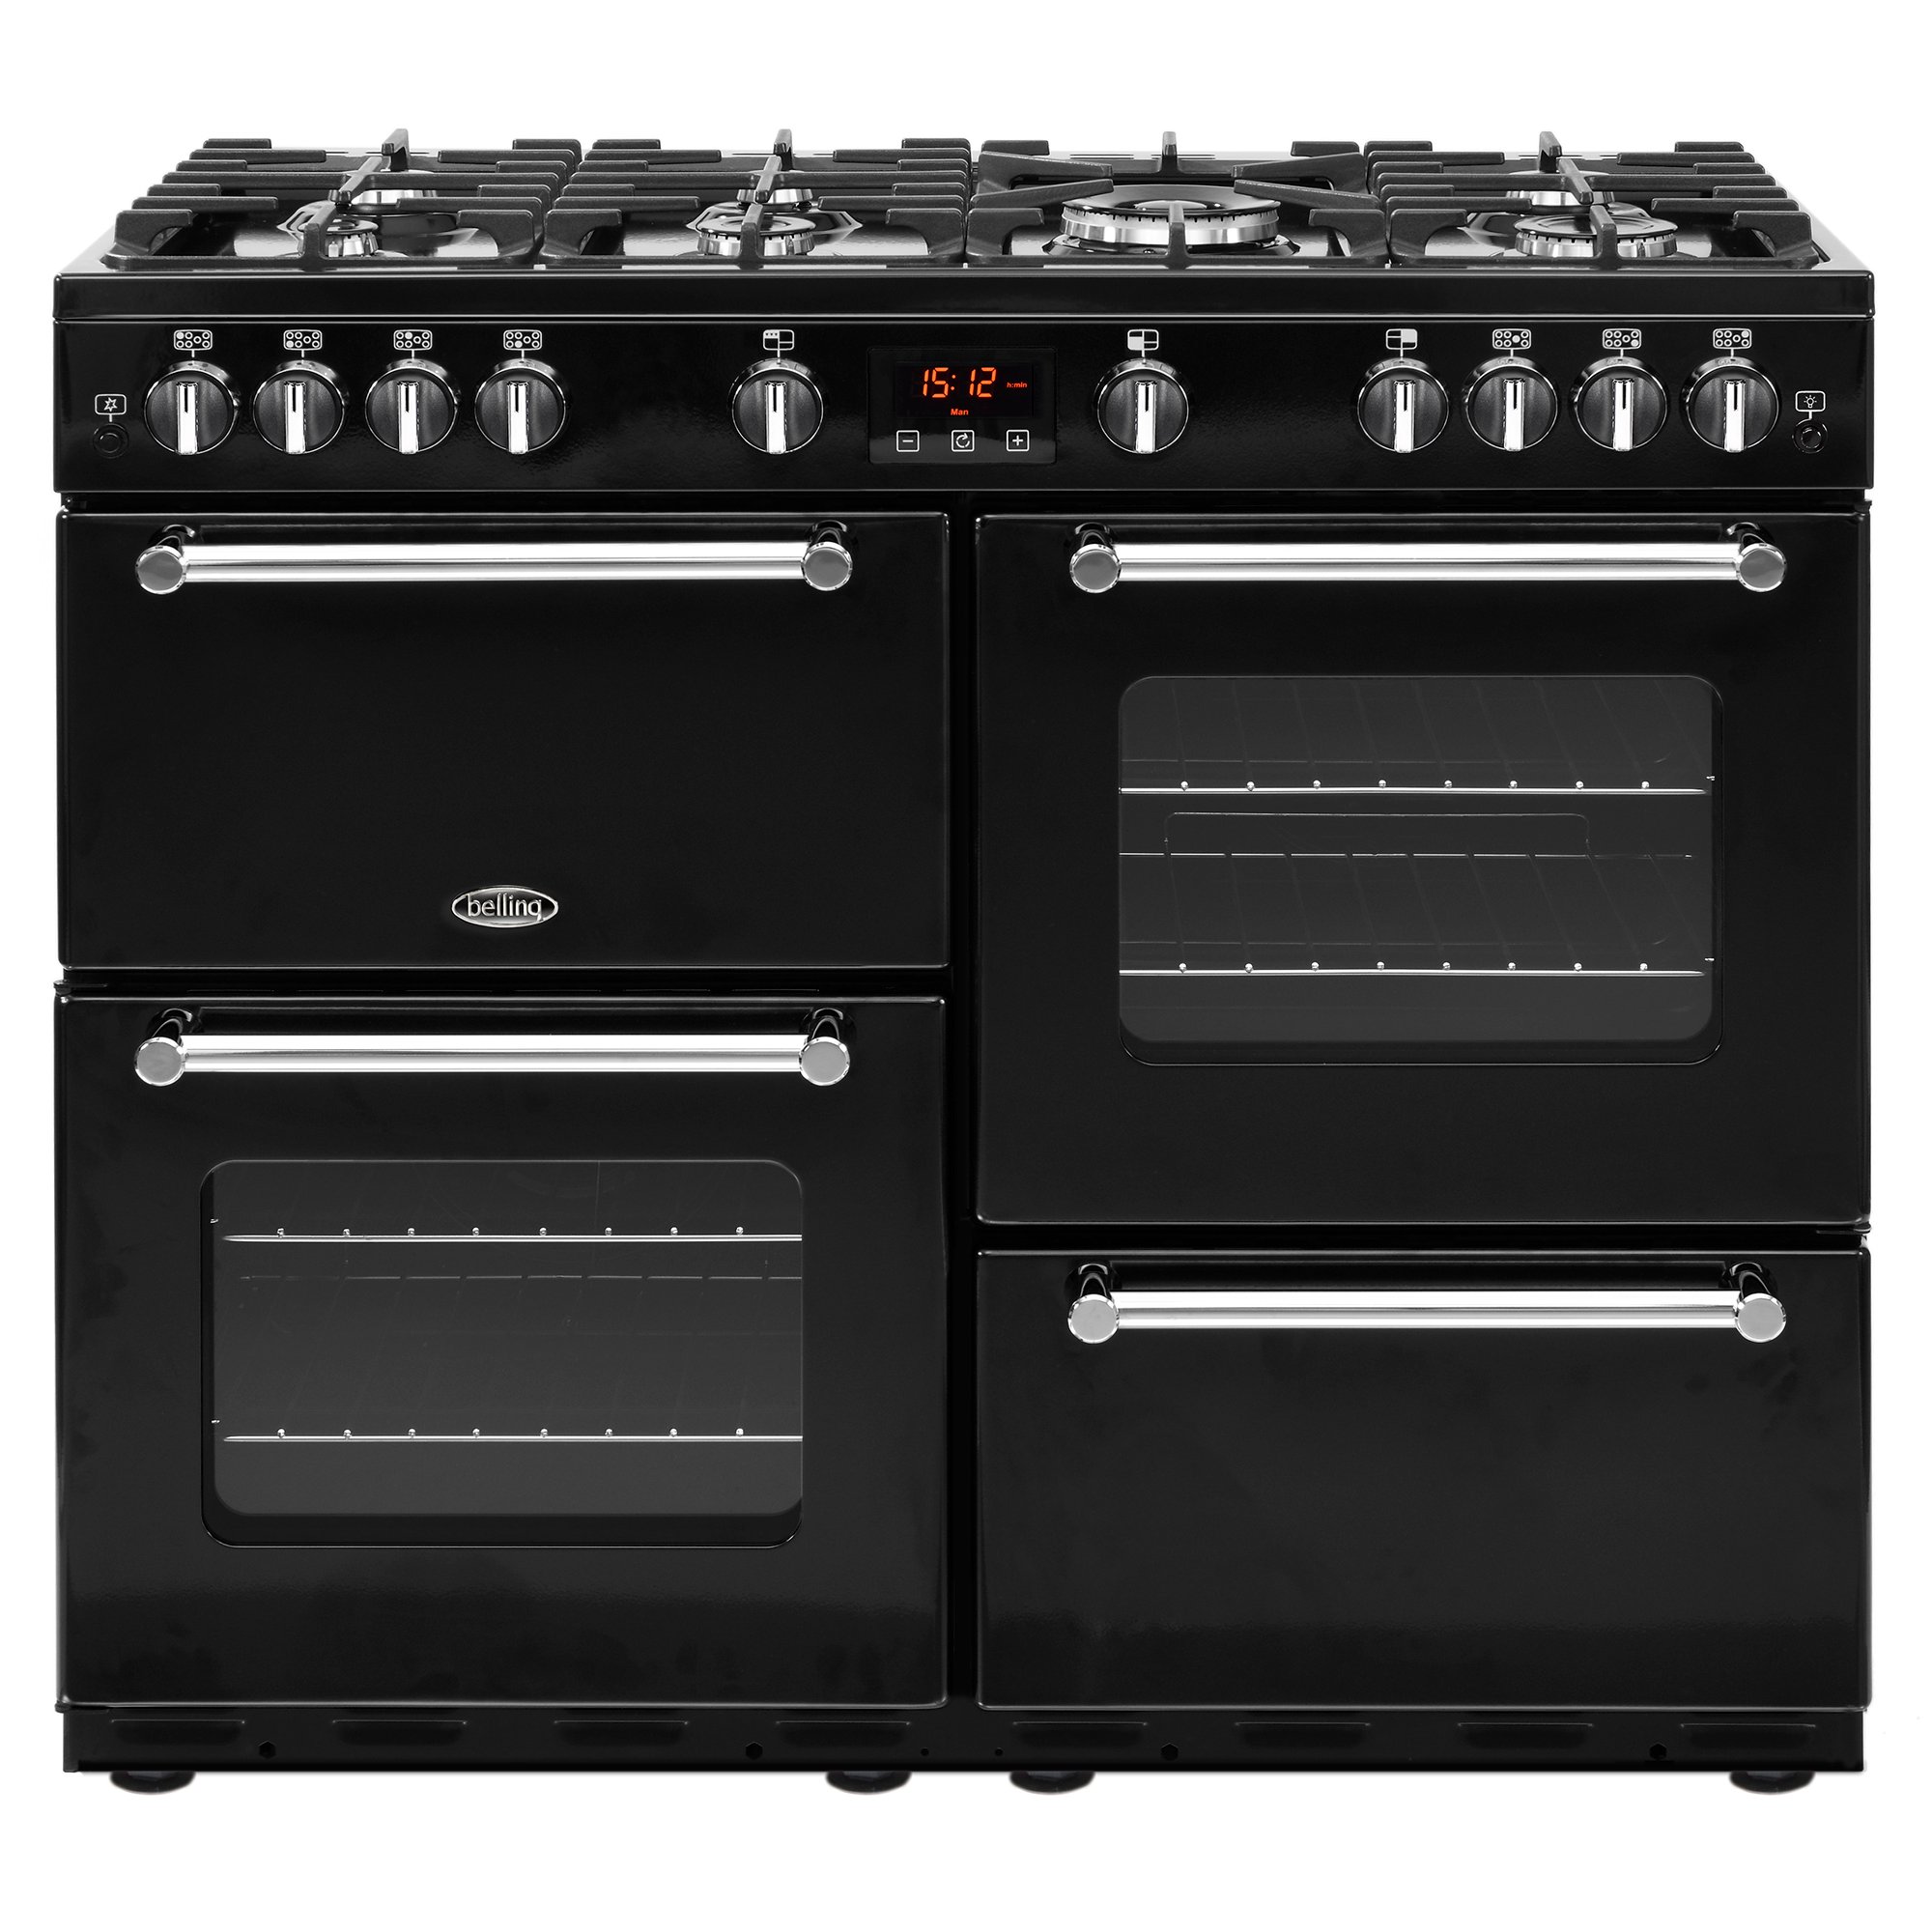 100cm gas range cooker with 7 burner gas hob, 4kW Powerwok, Cast Iron Pansure Supports, Minute Minder and easy clean enamel.